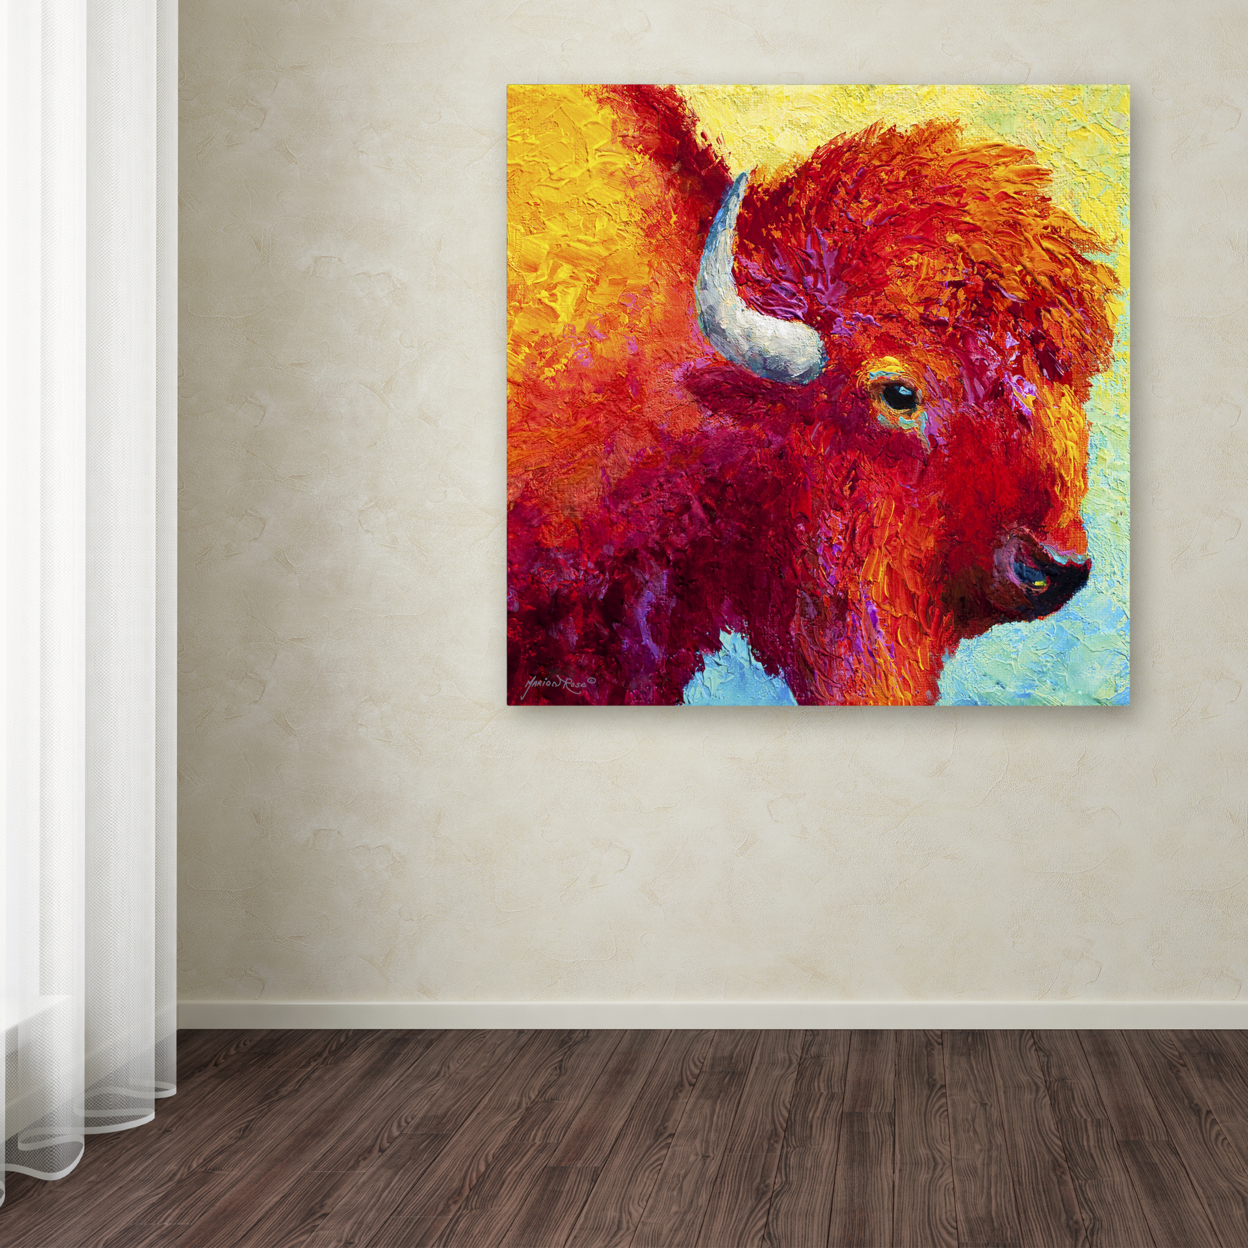 Marion Rose 'Bison Head IV' Ready To Hang Canvas Art 14 X 14 Inches Made In USA